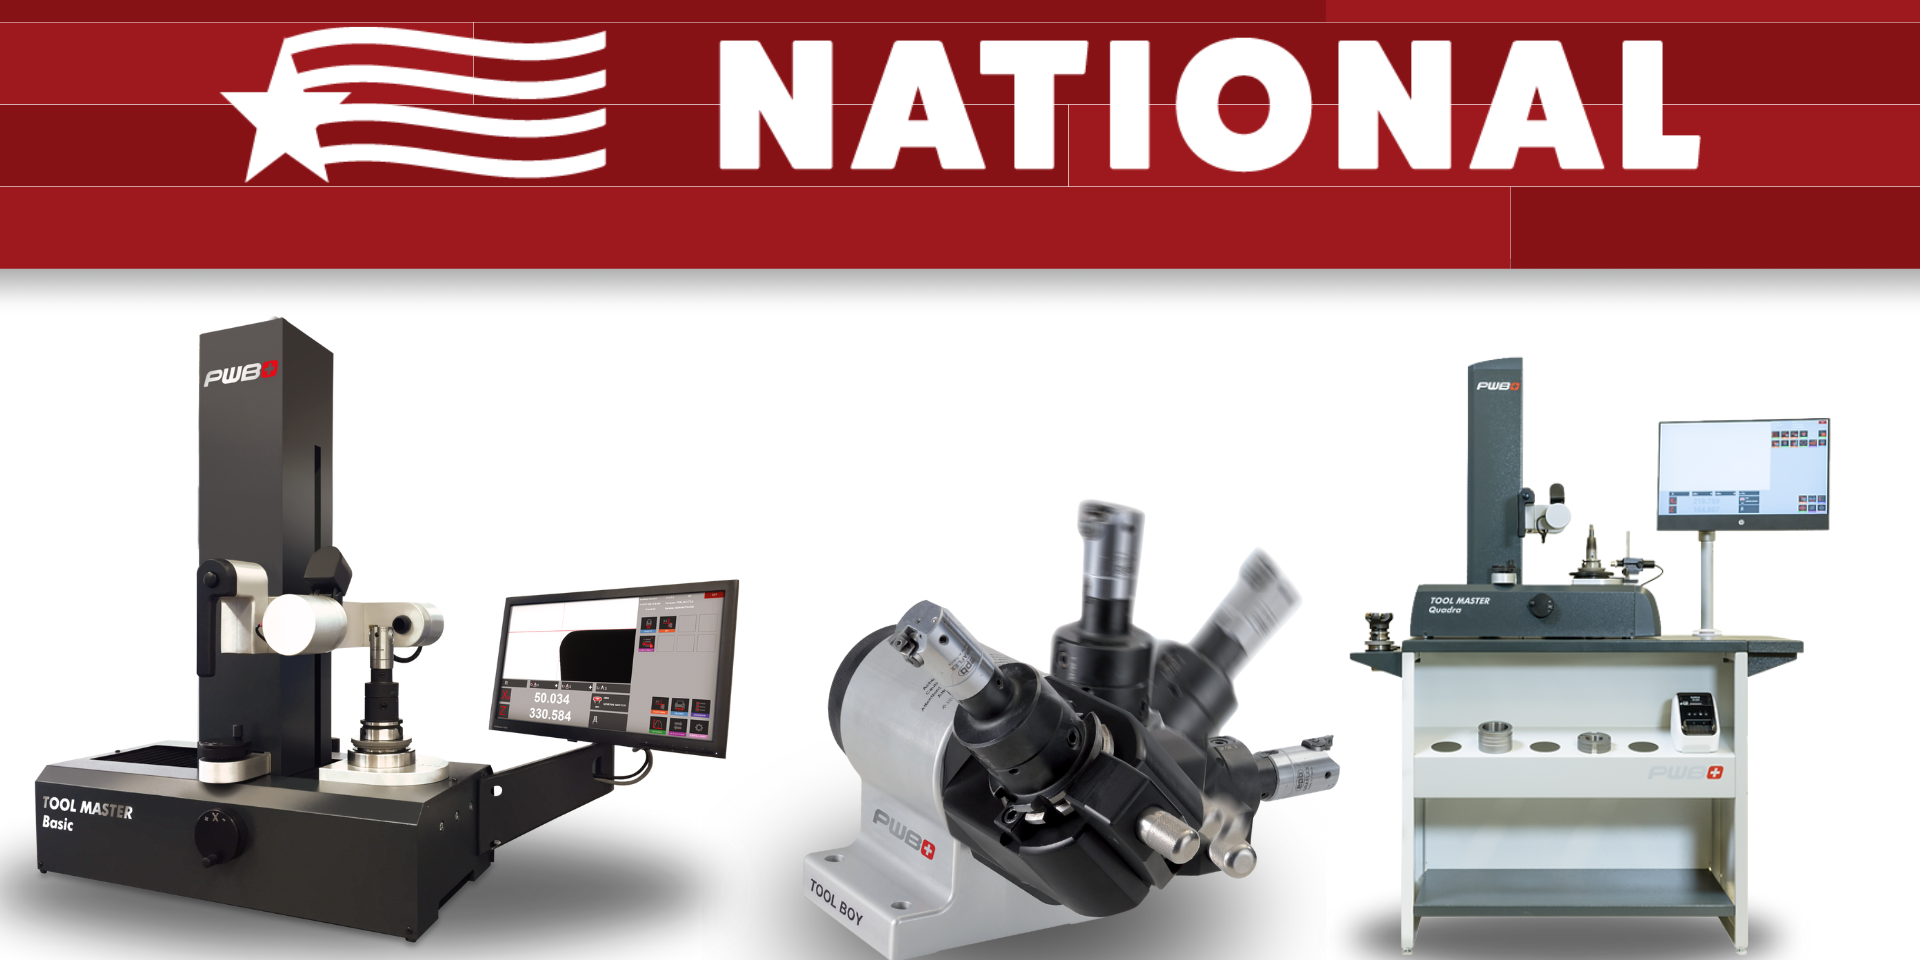 Tool Presetters by EVOSET, distributed by National Machine Products